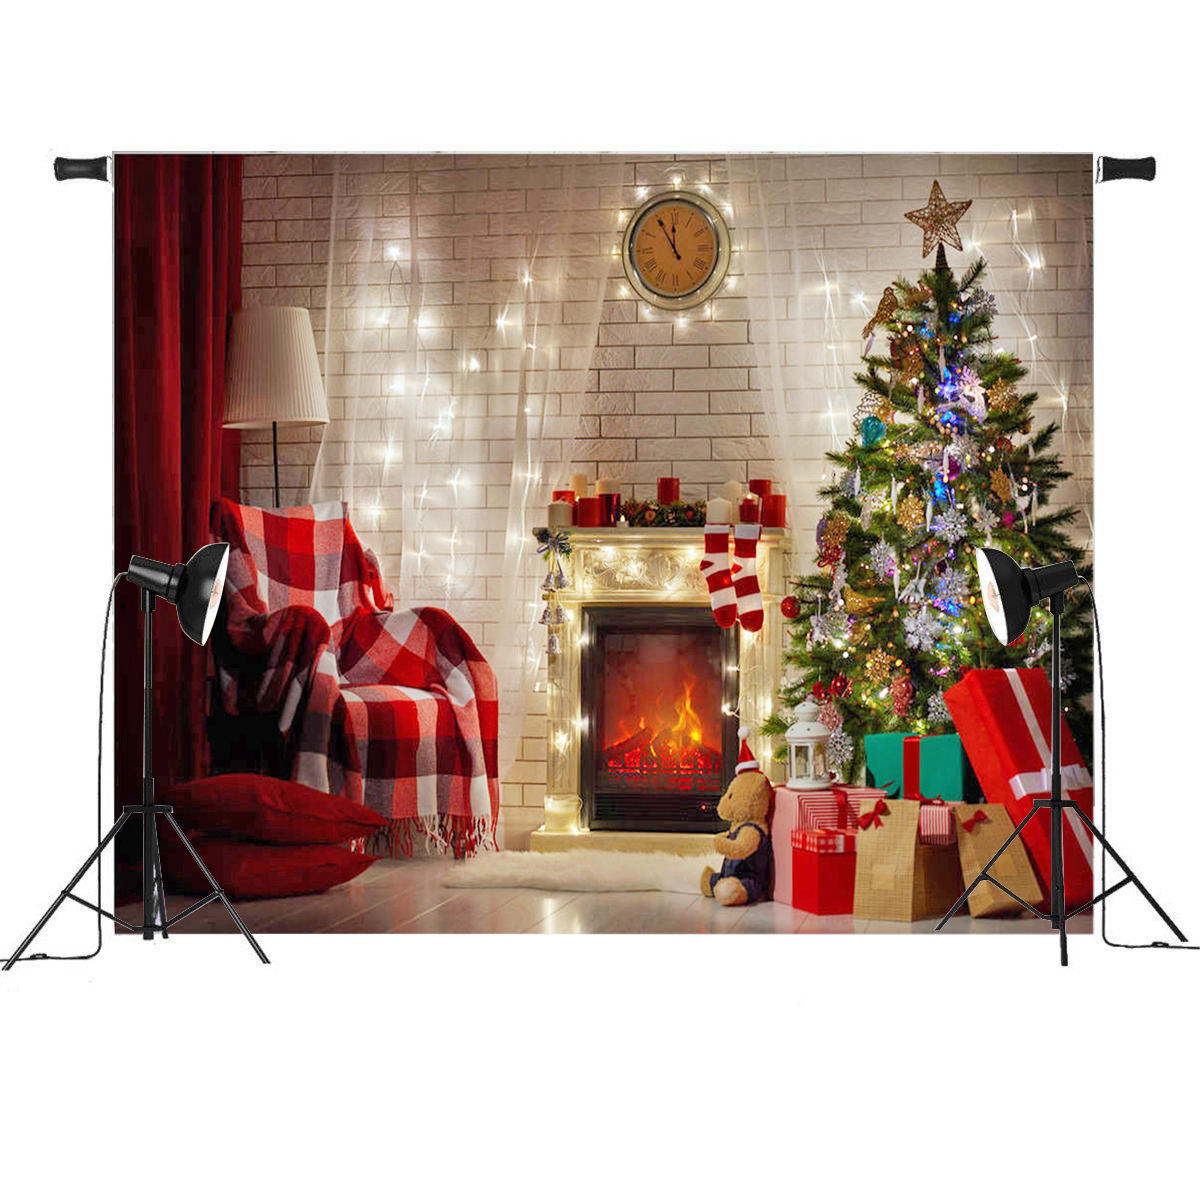 Congo Fireplace Fresh 7x5ft Red Christmas Tree Gift Chair Fireplace Graphy Backdrop Studio Prop Background